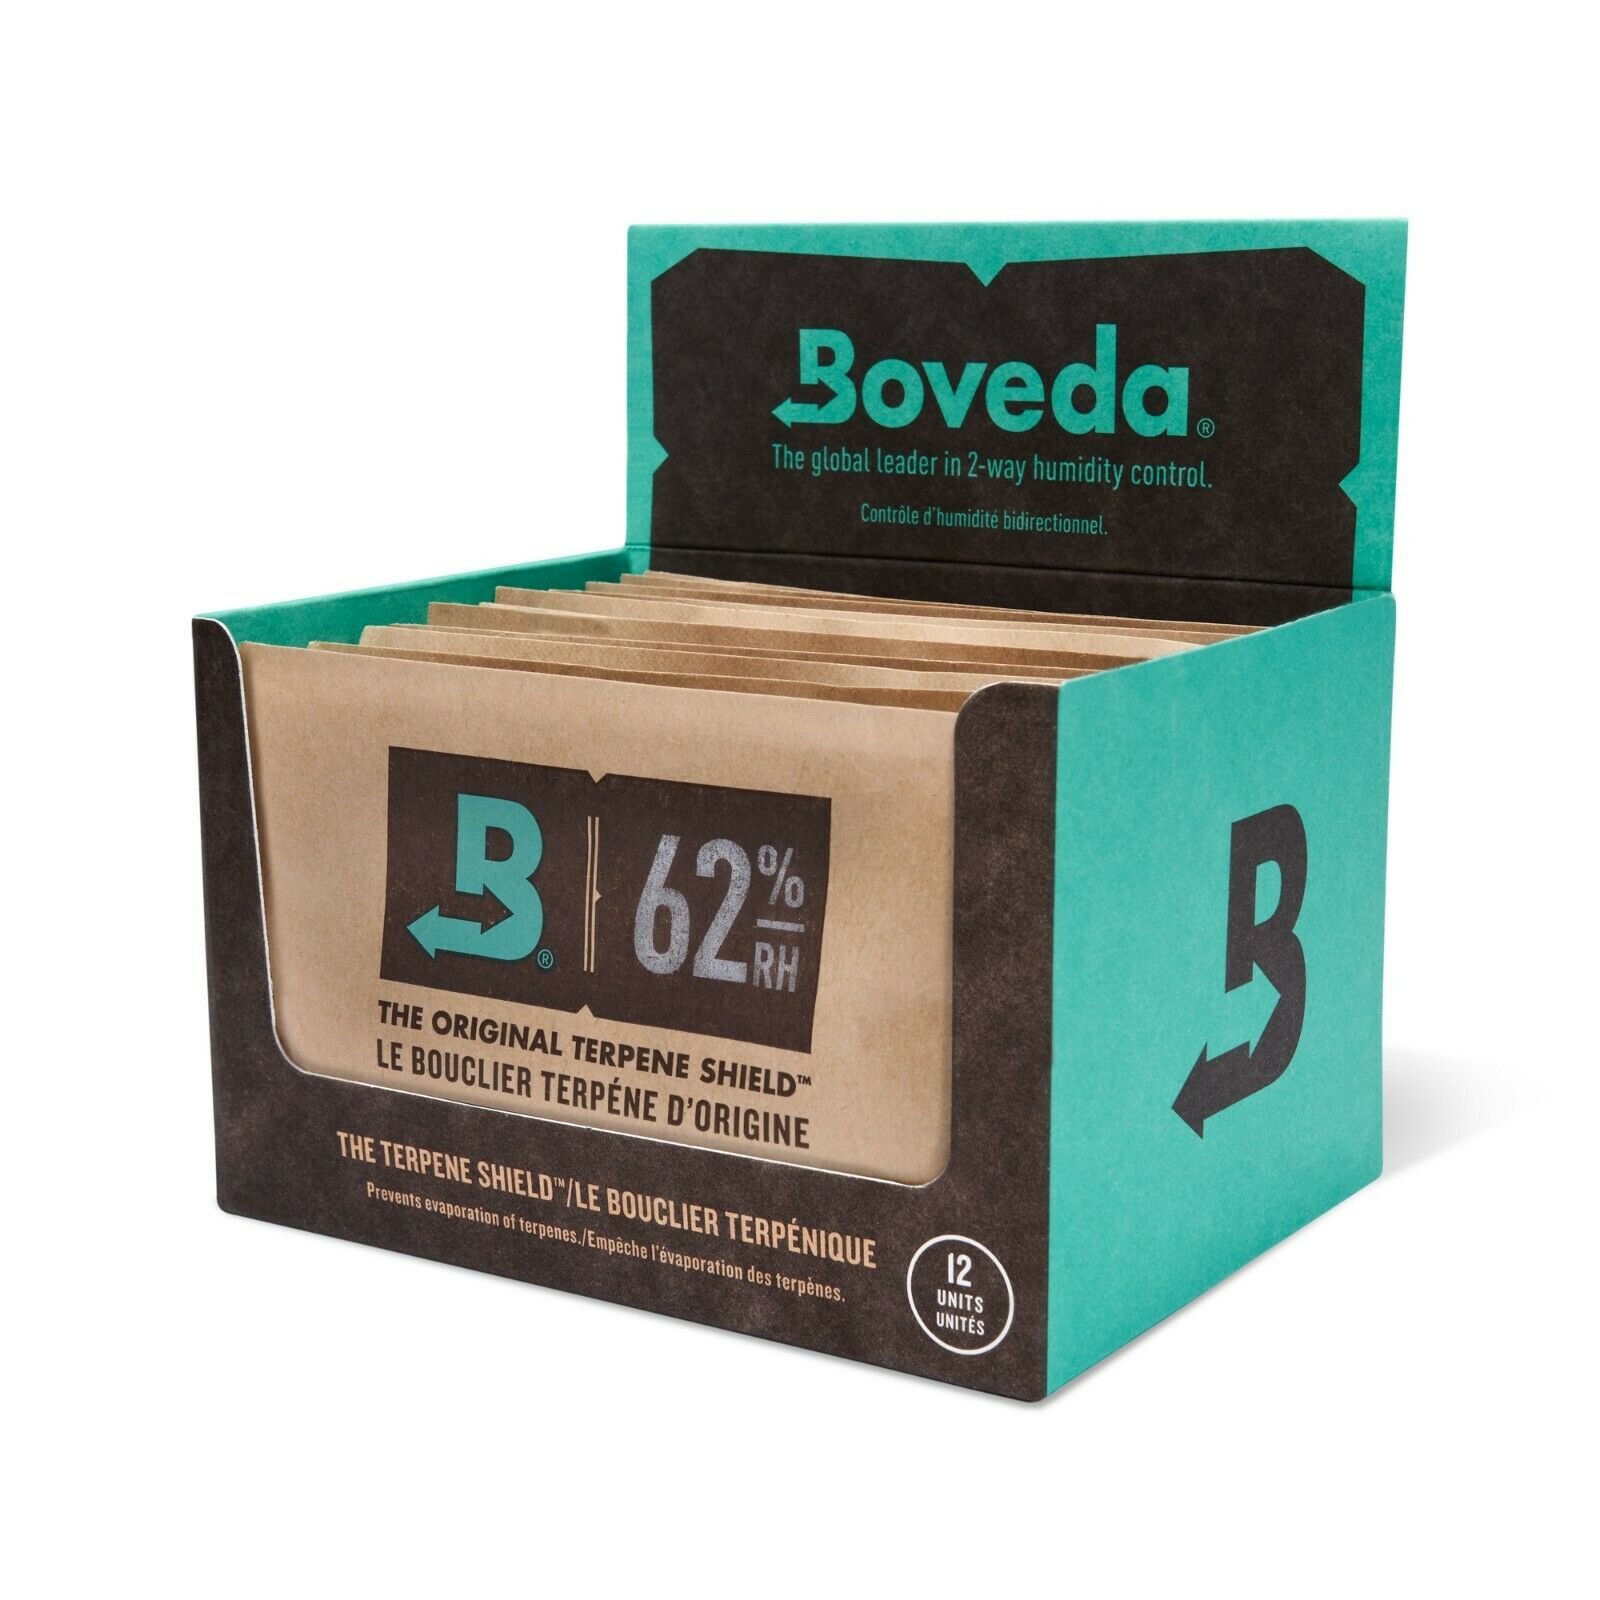 Boveda 62% RH 2-Way Humidity Control | Size 67 Protects Up to 1 Lb | 12-Count